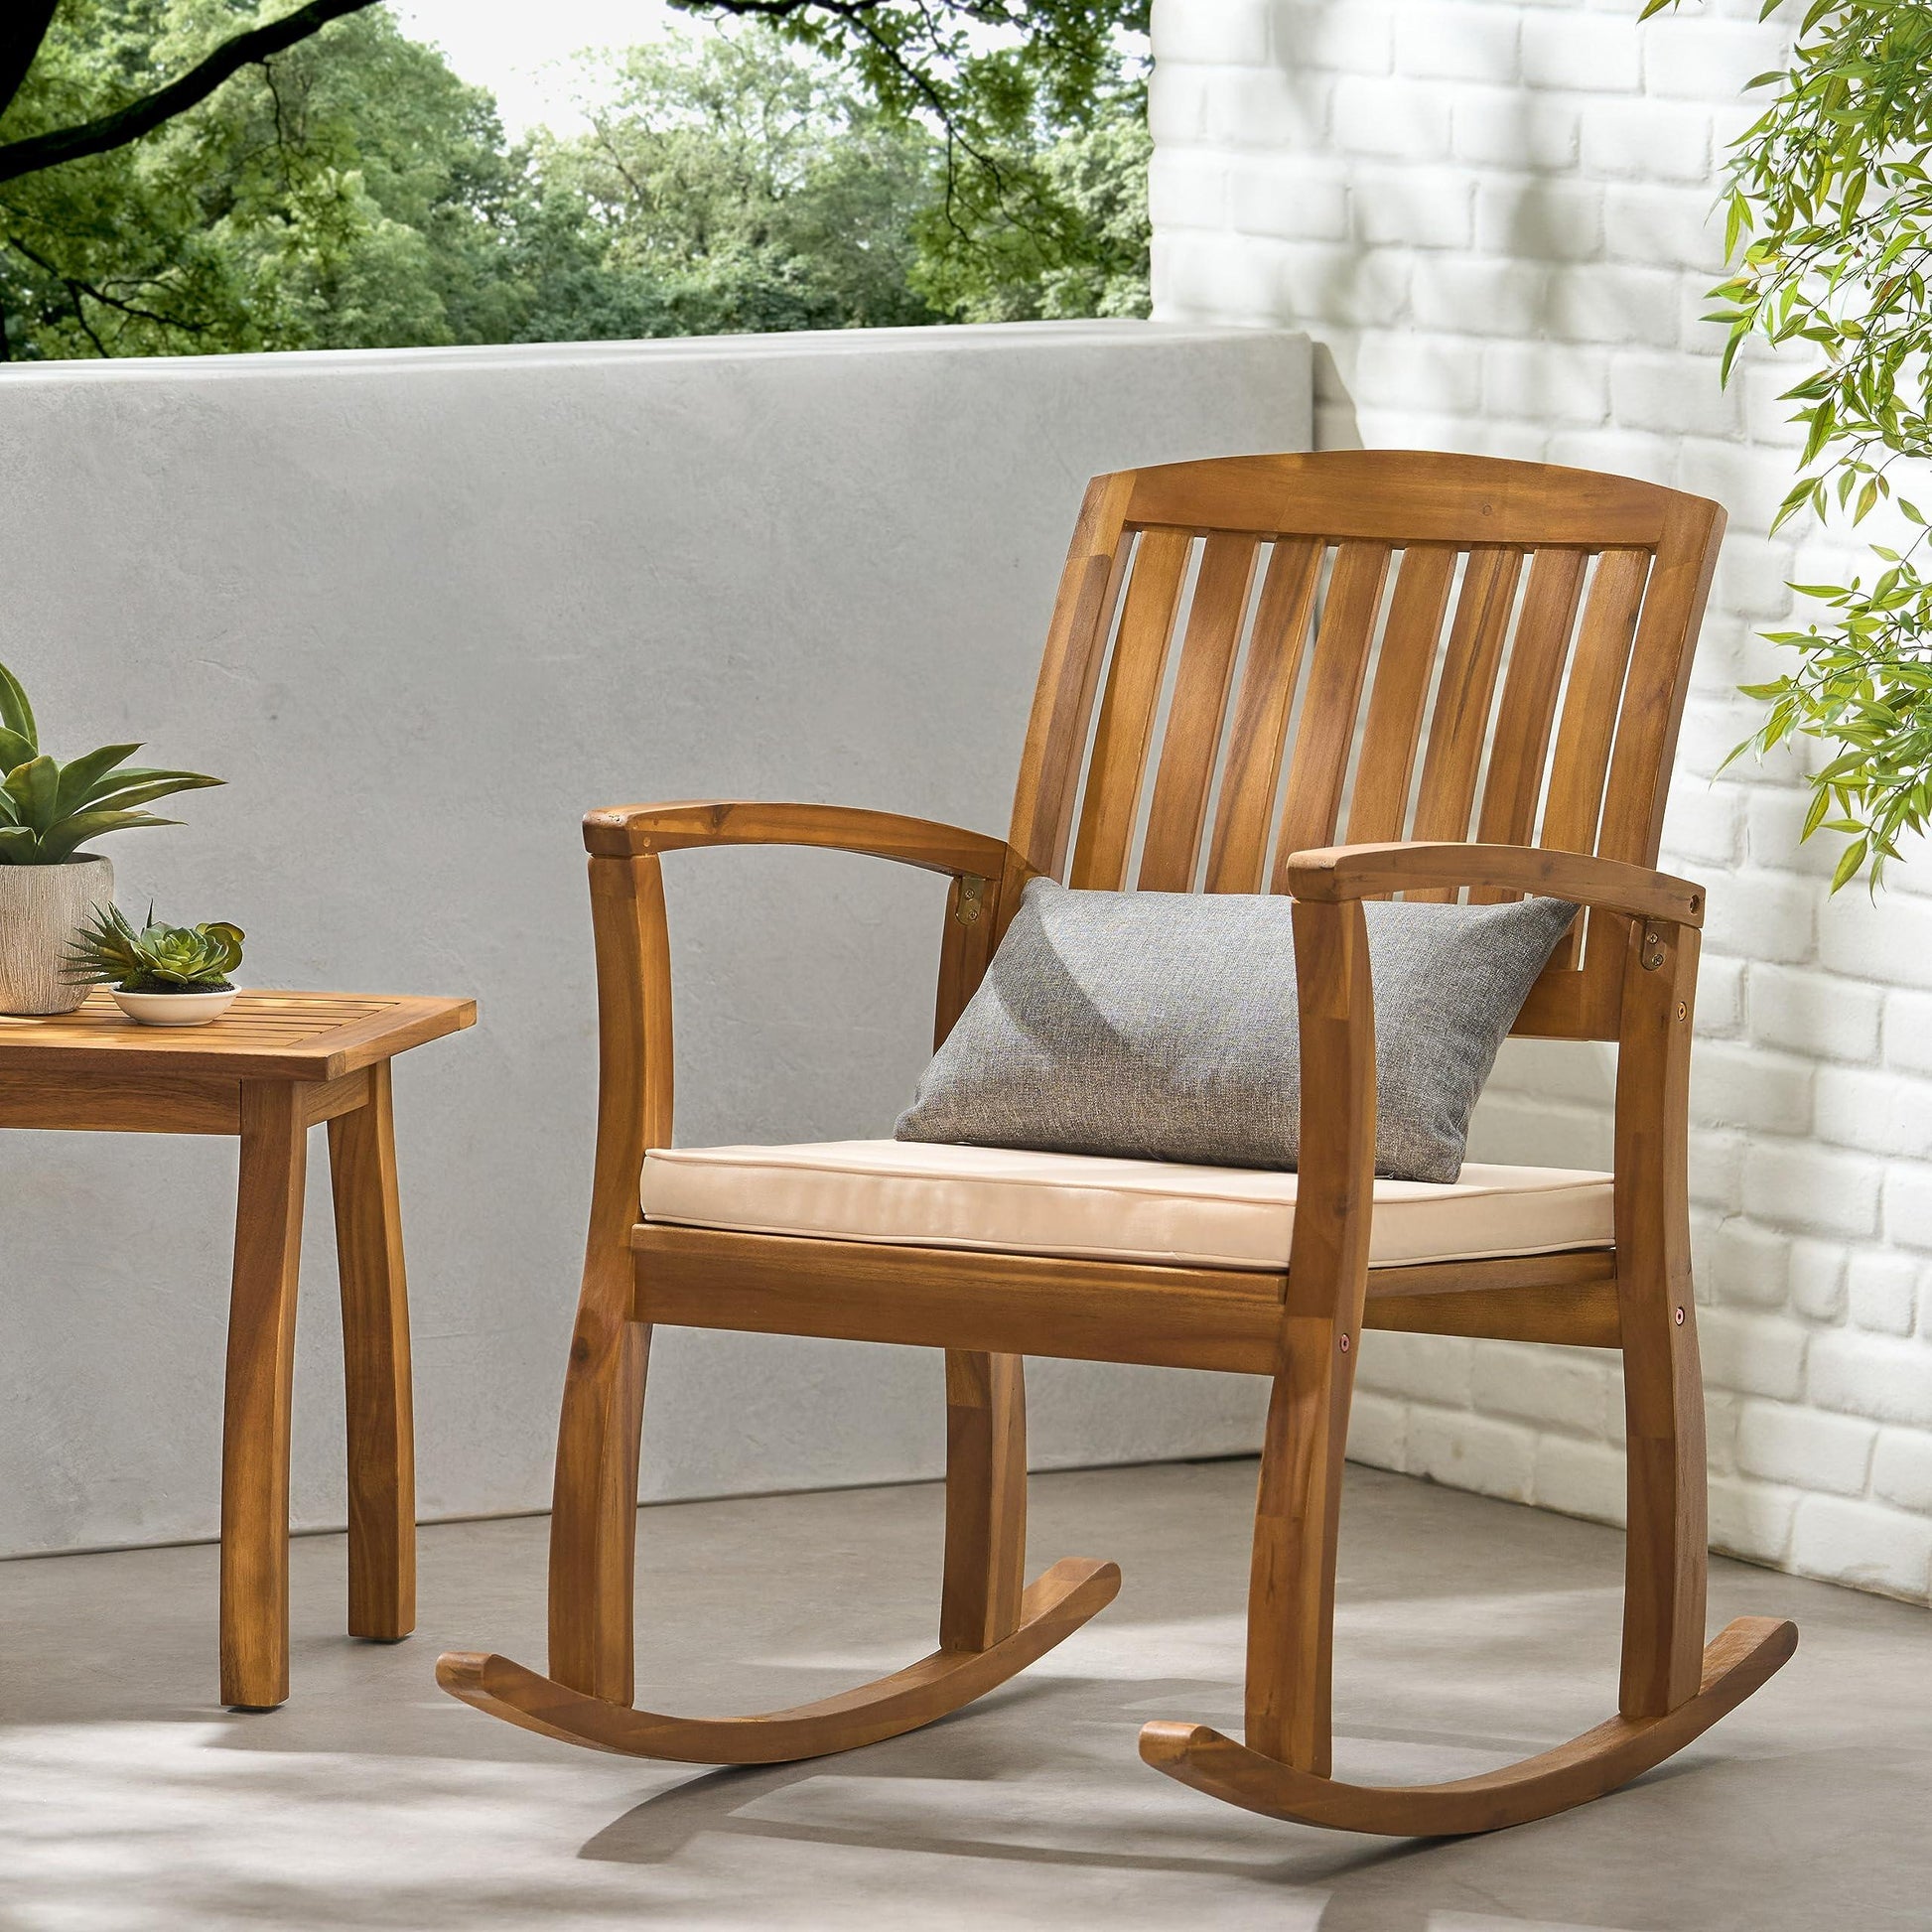 Christopher Knight Home Selma Acacia Rocking Chair with Cushion, Teak Finish - CookCave